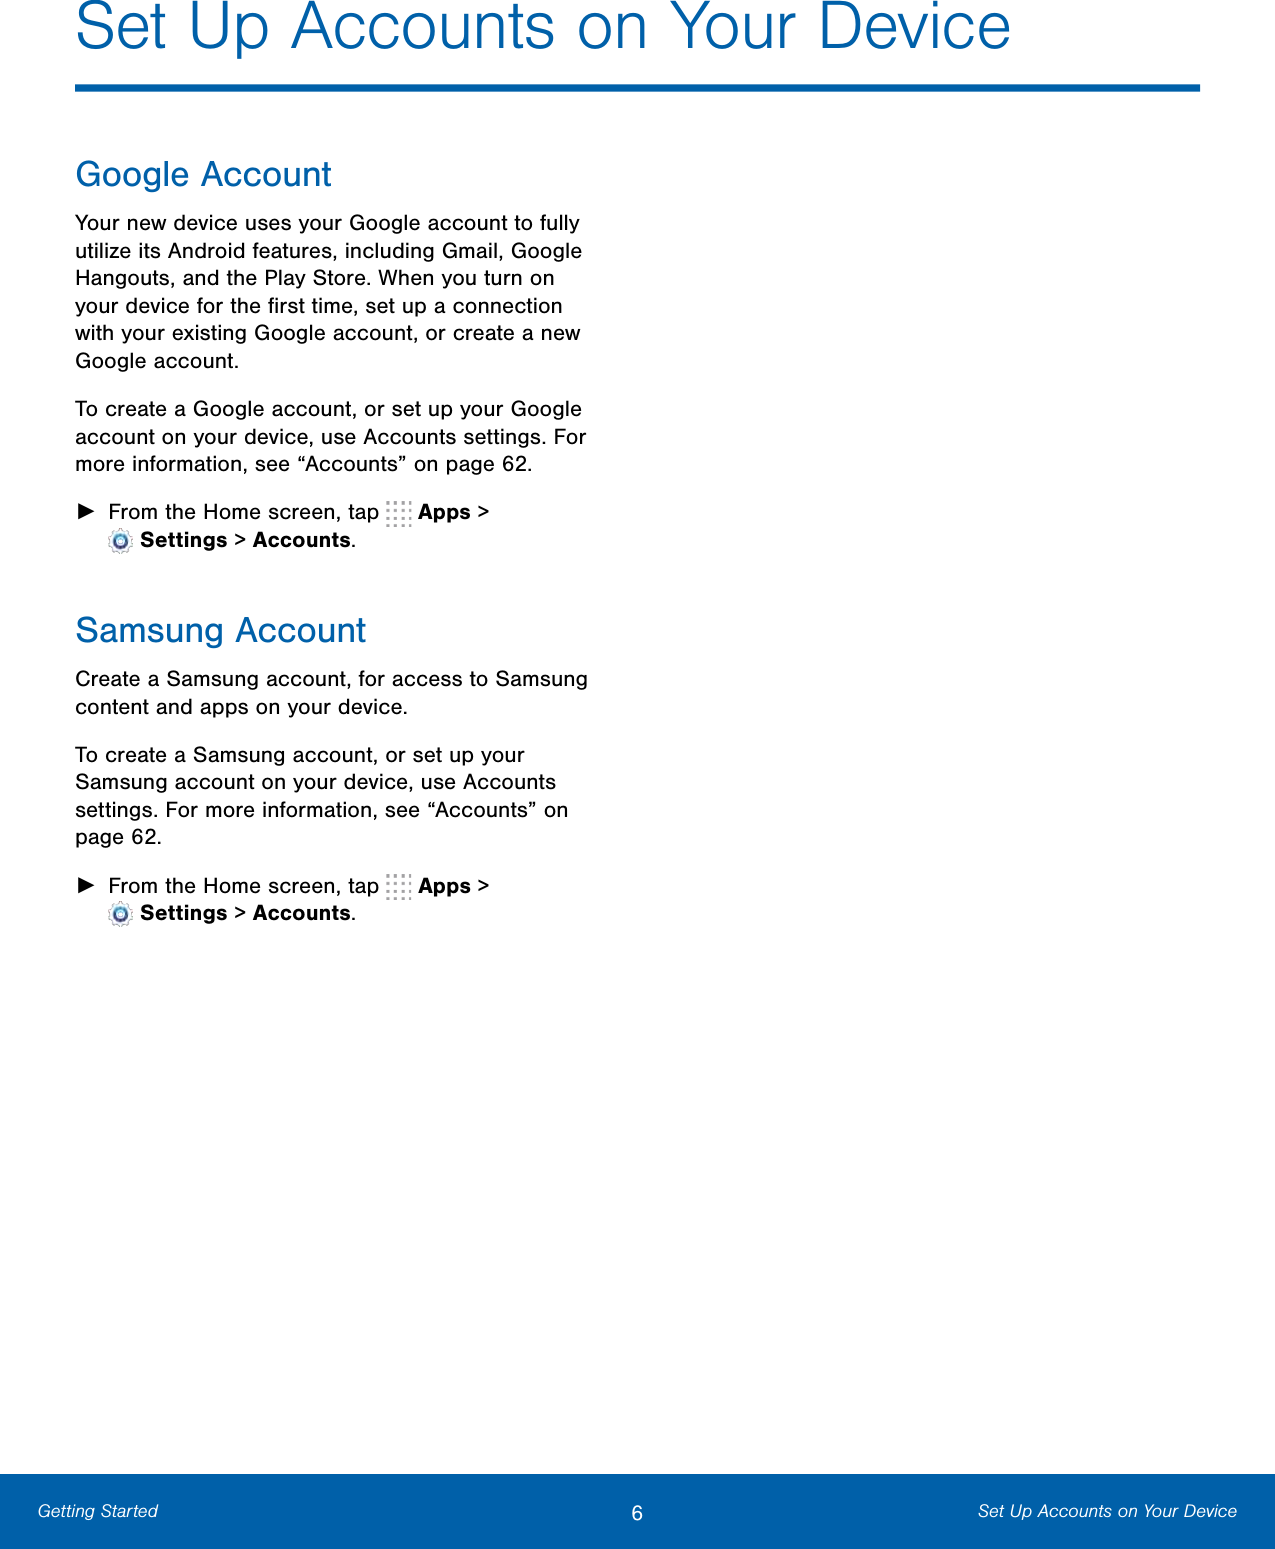 6Set Up Accounts on Your DeviceGetting StartedSet Up Accounts on Your DeviceGoogle AccountYour new device uses your Google account to fully utilize its Android features, including Gmail, Google Hangouts, and the Play Store. When you turn on your device for the ﬁrst time, set up a connection with your existing Google account, or create a new Google account.To create a Google account, or set up your Google account on your device, use Accounts settings. For more information, see “Accounts” on page62.►From the Home screen, tap   Apps &gt;Settings &gt; Accounts.Samsung AccountCreate a Samsung account, for access to Samsung content and apps on your device. To create a Samsung account, or set up your Samsung account on your device, use Accounts settings. For more information, see “Accounts” on page62.►From the Home screen, tap   Apps &gt;Settings &gt; Accounts.